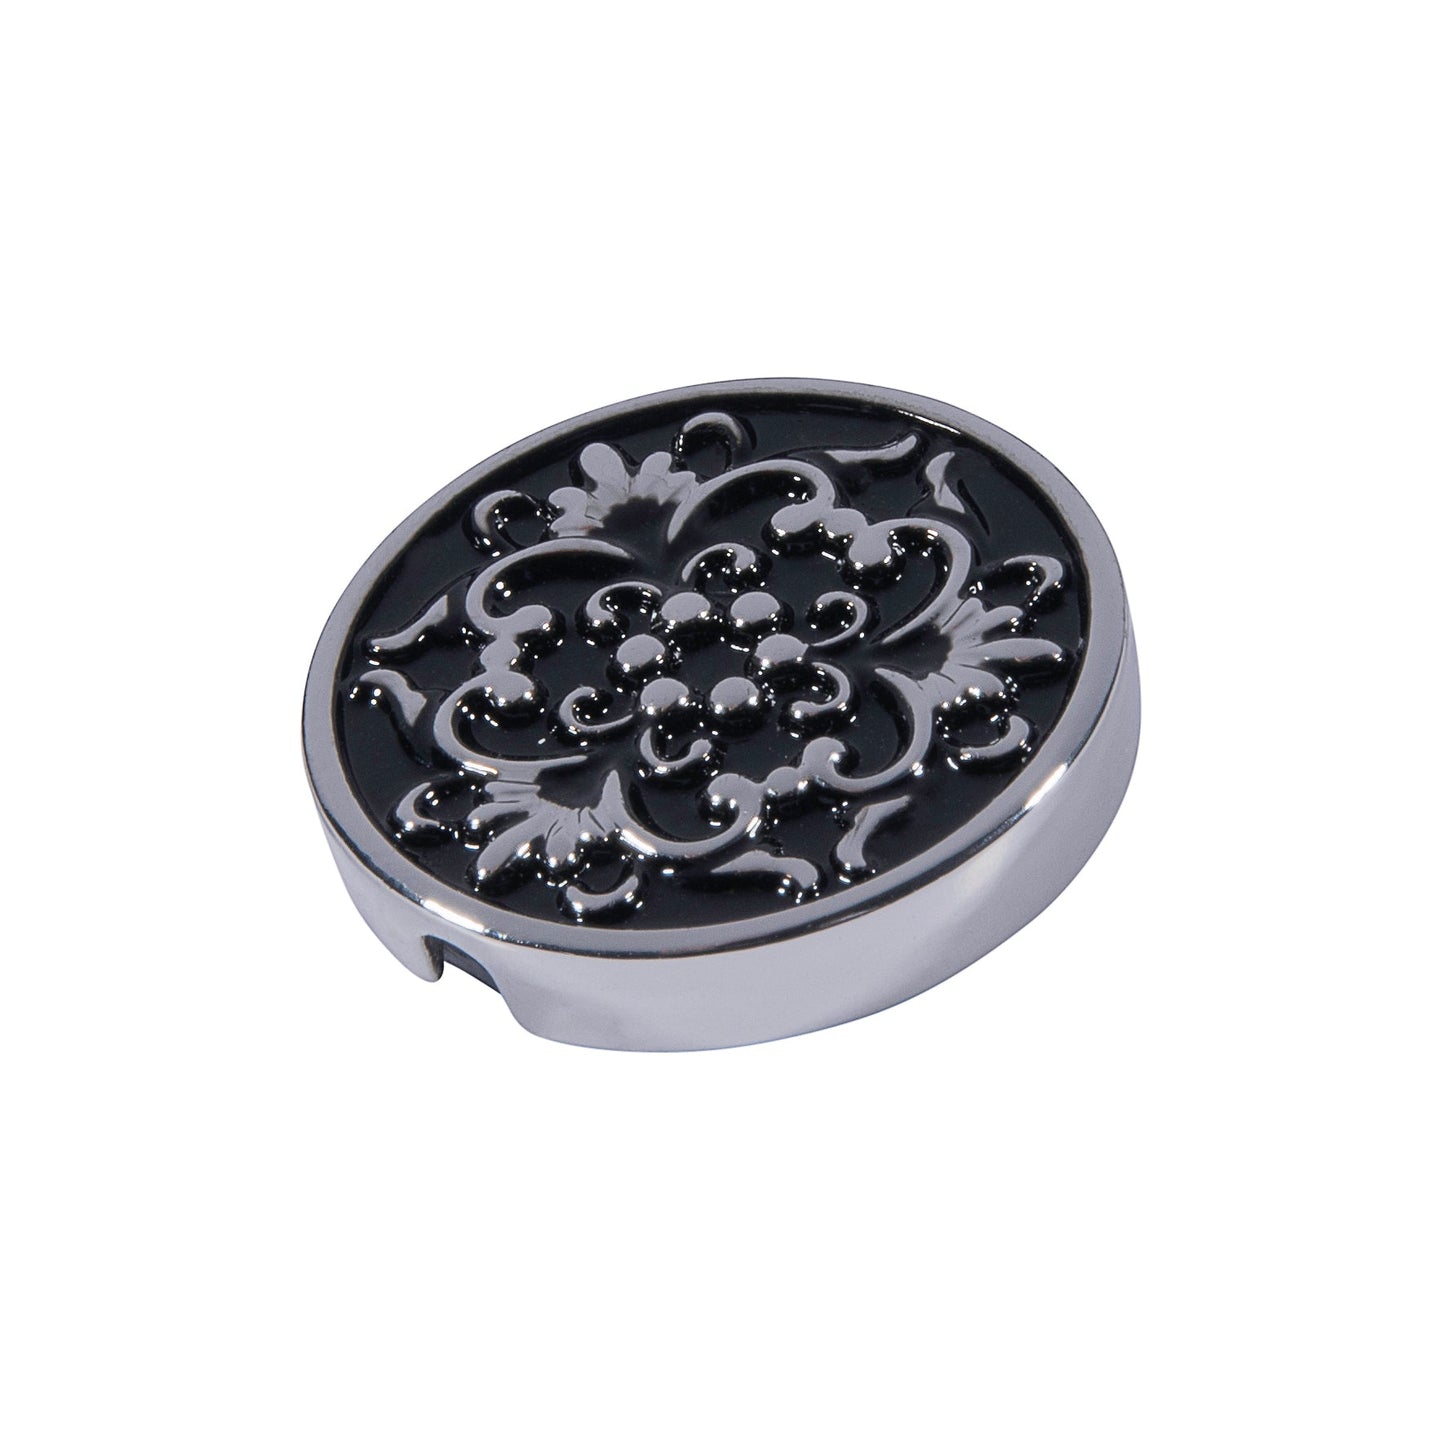 21mm button in shiny silver metal with baroque pattern on black varnish "BLACK BAROQUE"